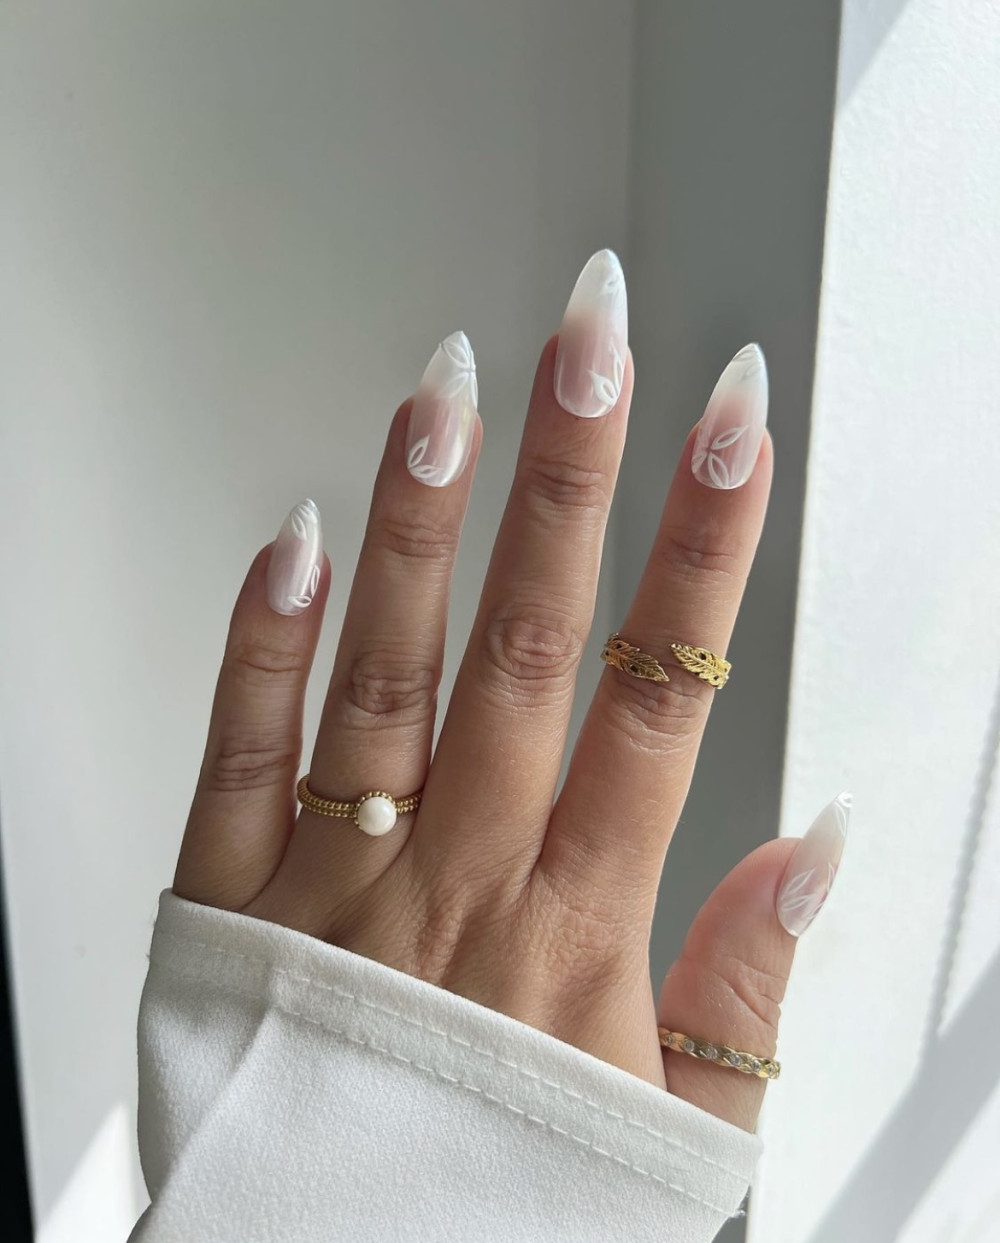 40 Stunning Wedding Nail Designs For Your Dream Wedding - 301